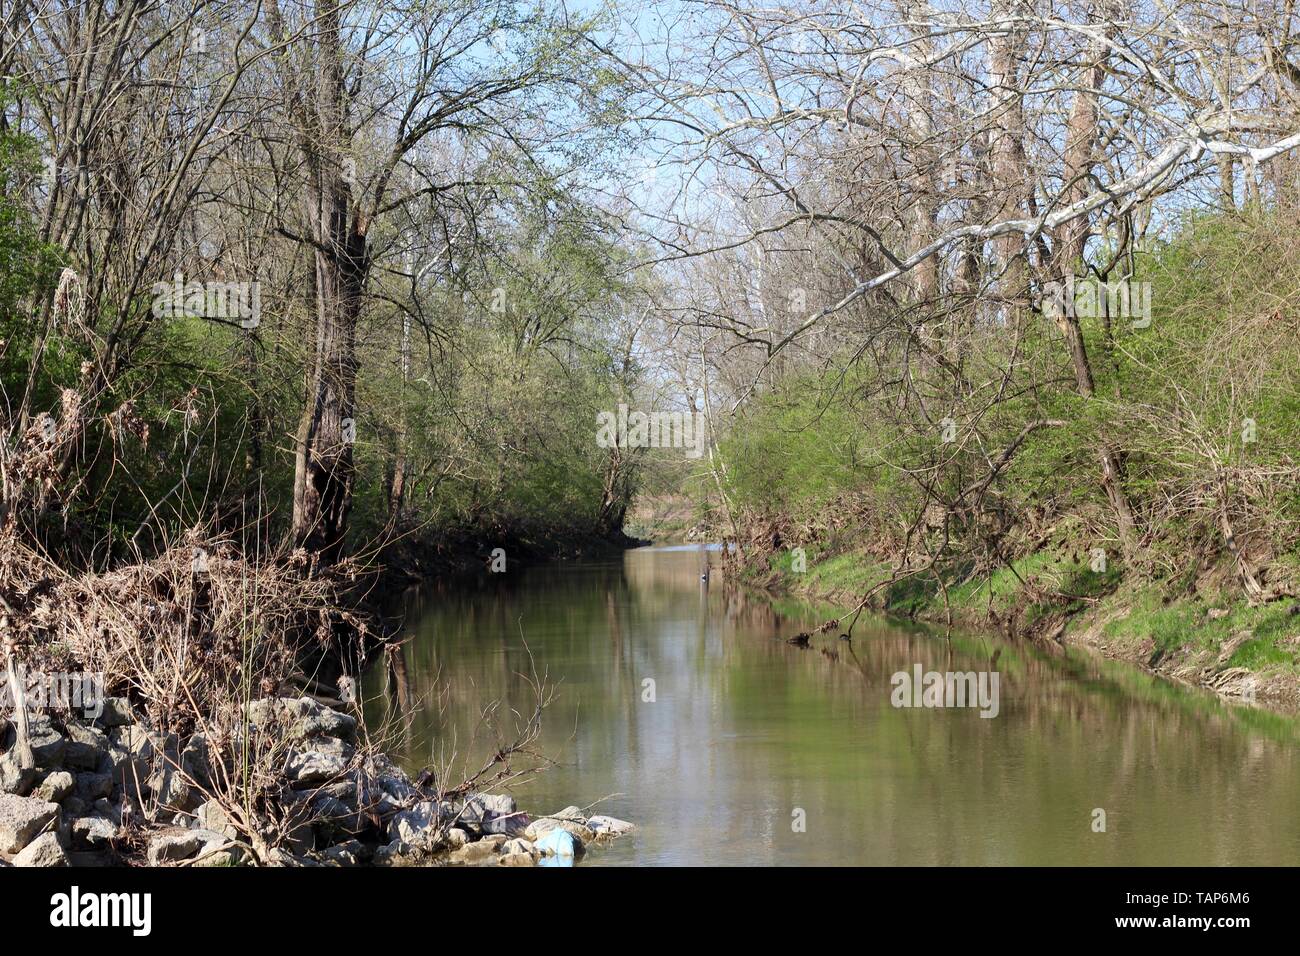 A day in the beautiful county park on a sunny springtime day in Cincinnati Ohio. Stock Photo